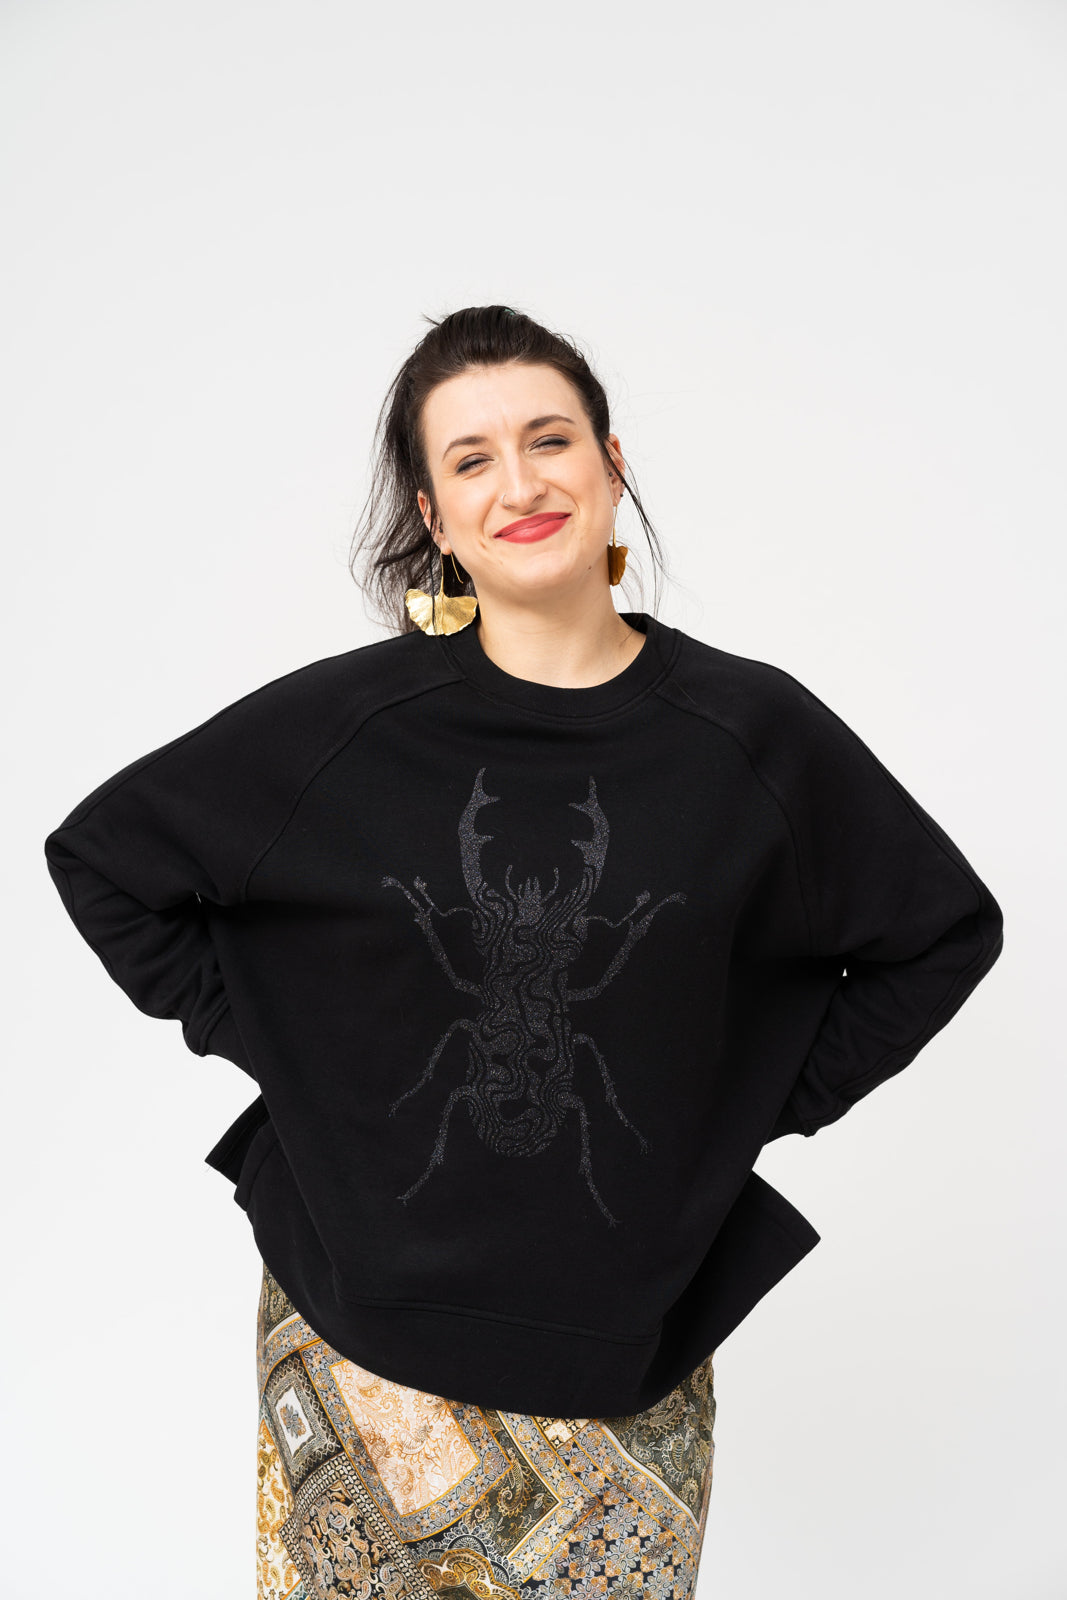 Women's oversize sweater with side cut - 300 g organic cotton - longer on the back